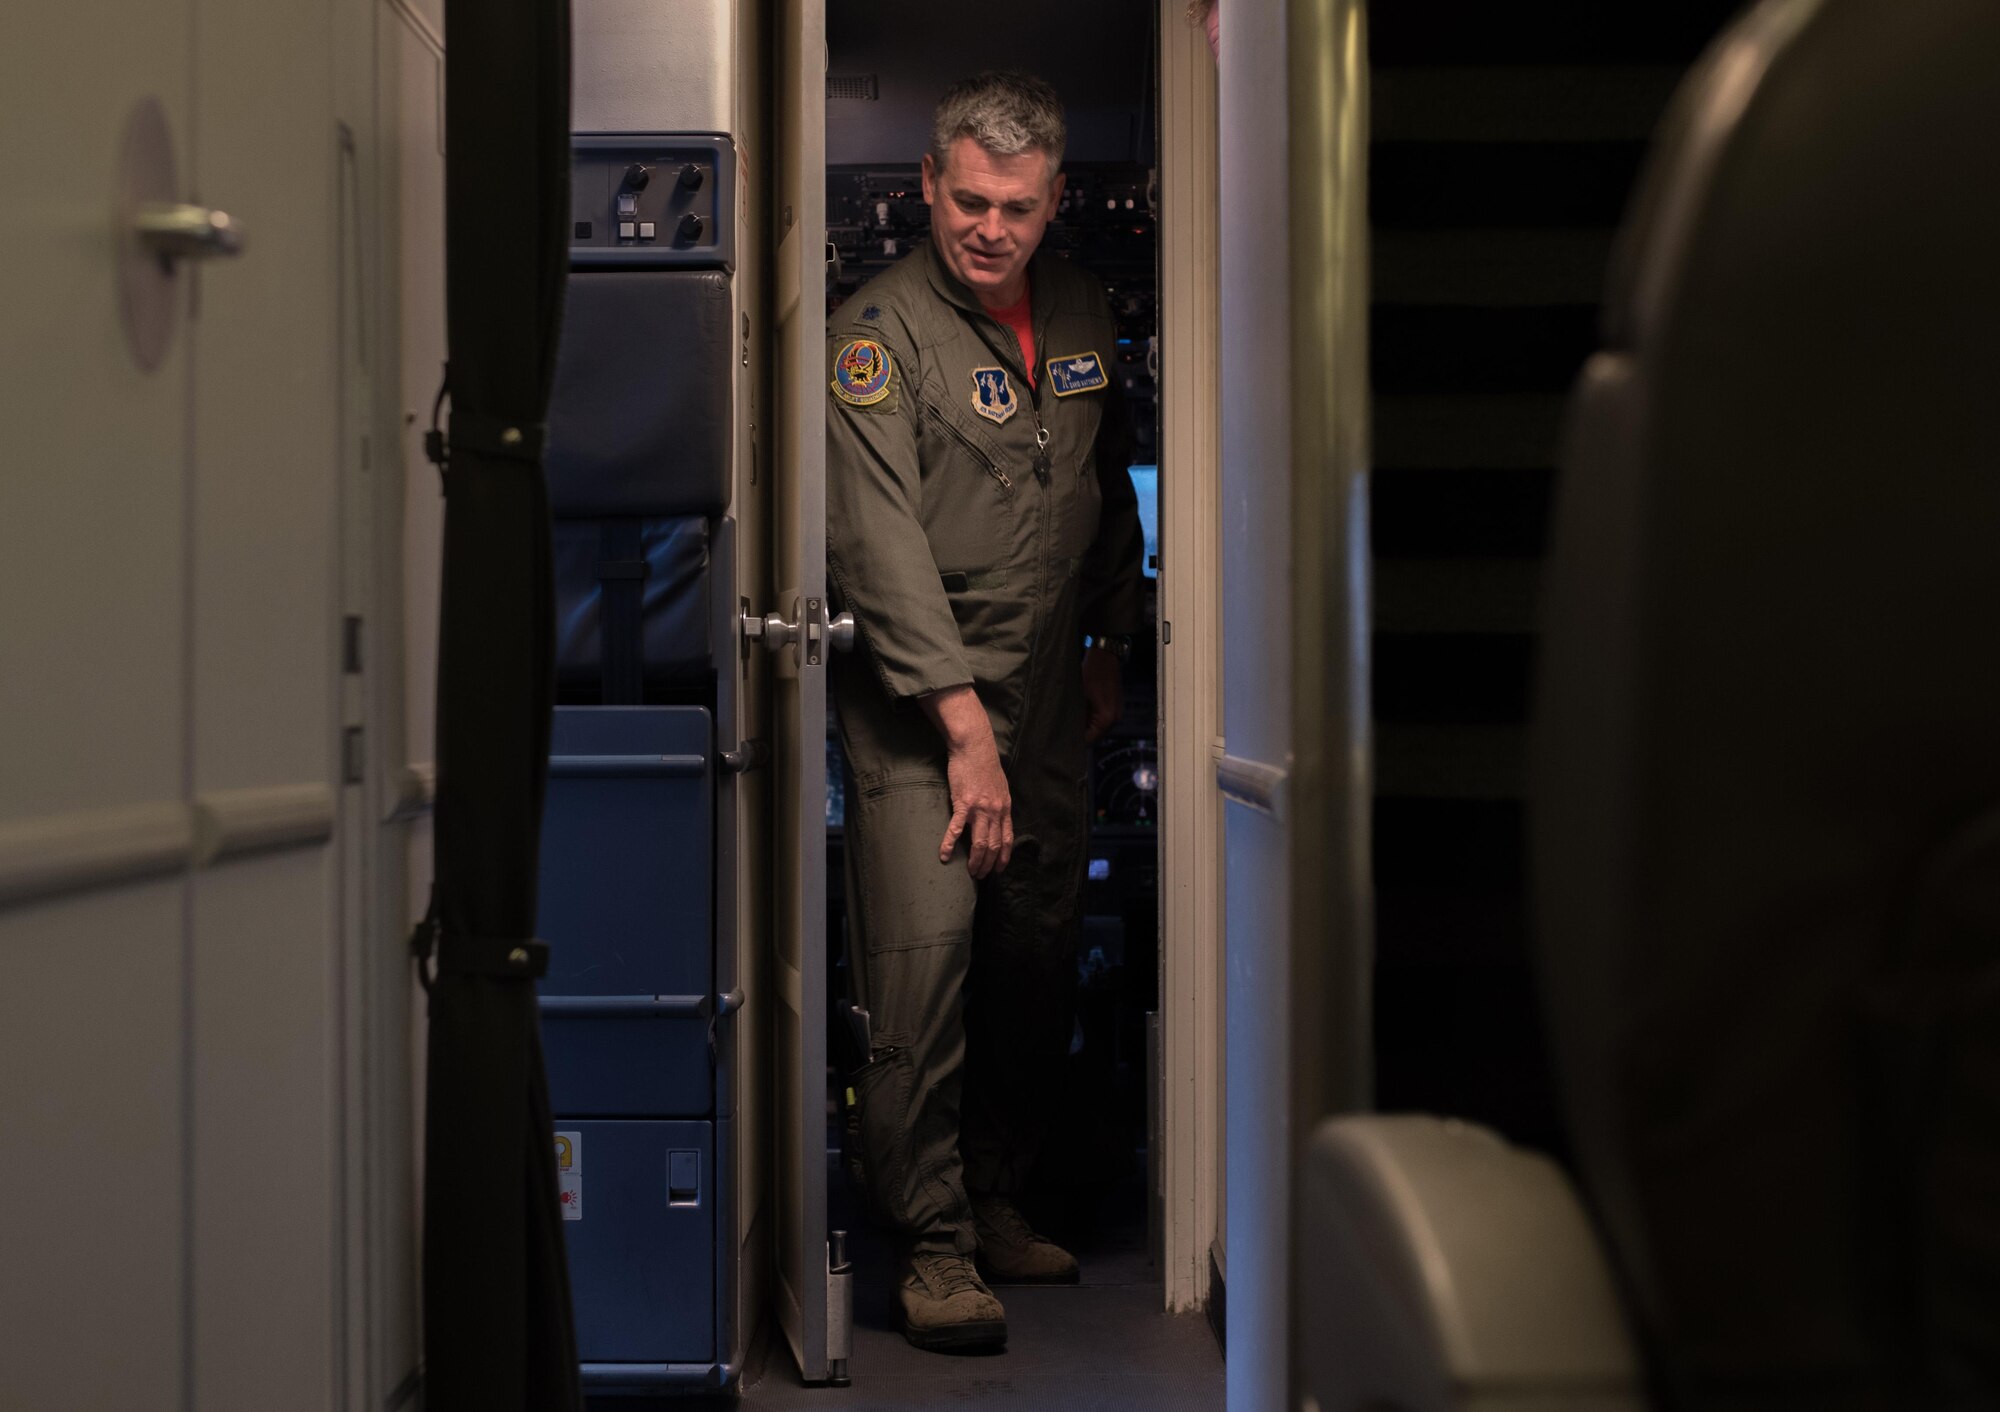 Lt. Col. David Matthews, 201st Airlift Squadron C-40 Clipper pilot, leaves the aircraft cockpit at Joint Base Andrews, Md., March 31, 2017. The squadron supports worldwide transportation for the Executive Branch, Congressional Members, Department of Defense officials and high-ranking U.S. foreign dignitaries. (U.S. Air Force photo by Senior Airman Jordyn Fetter)